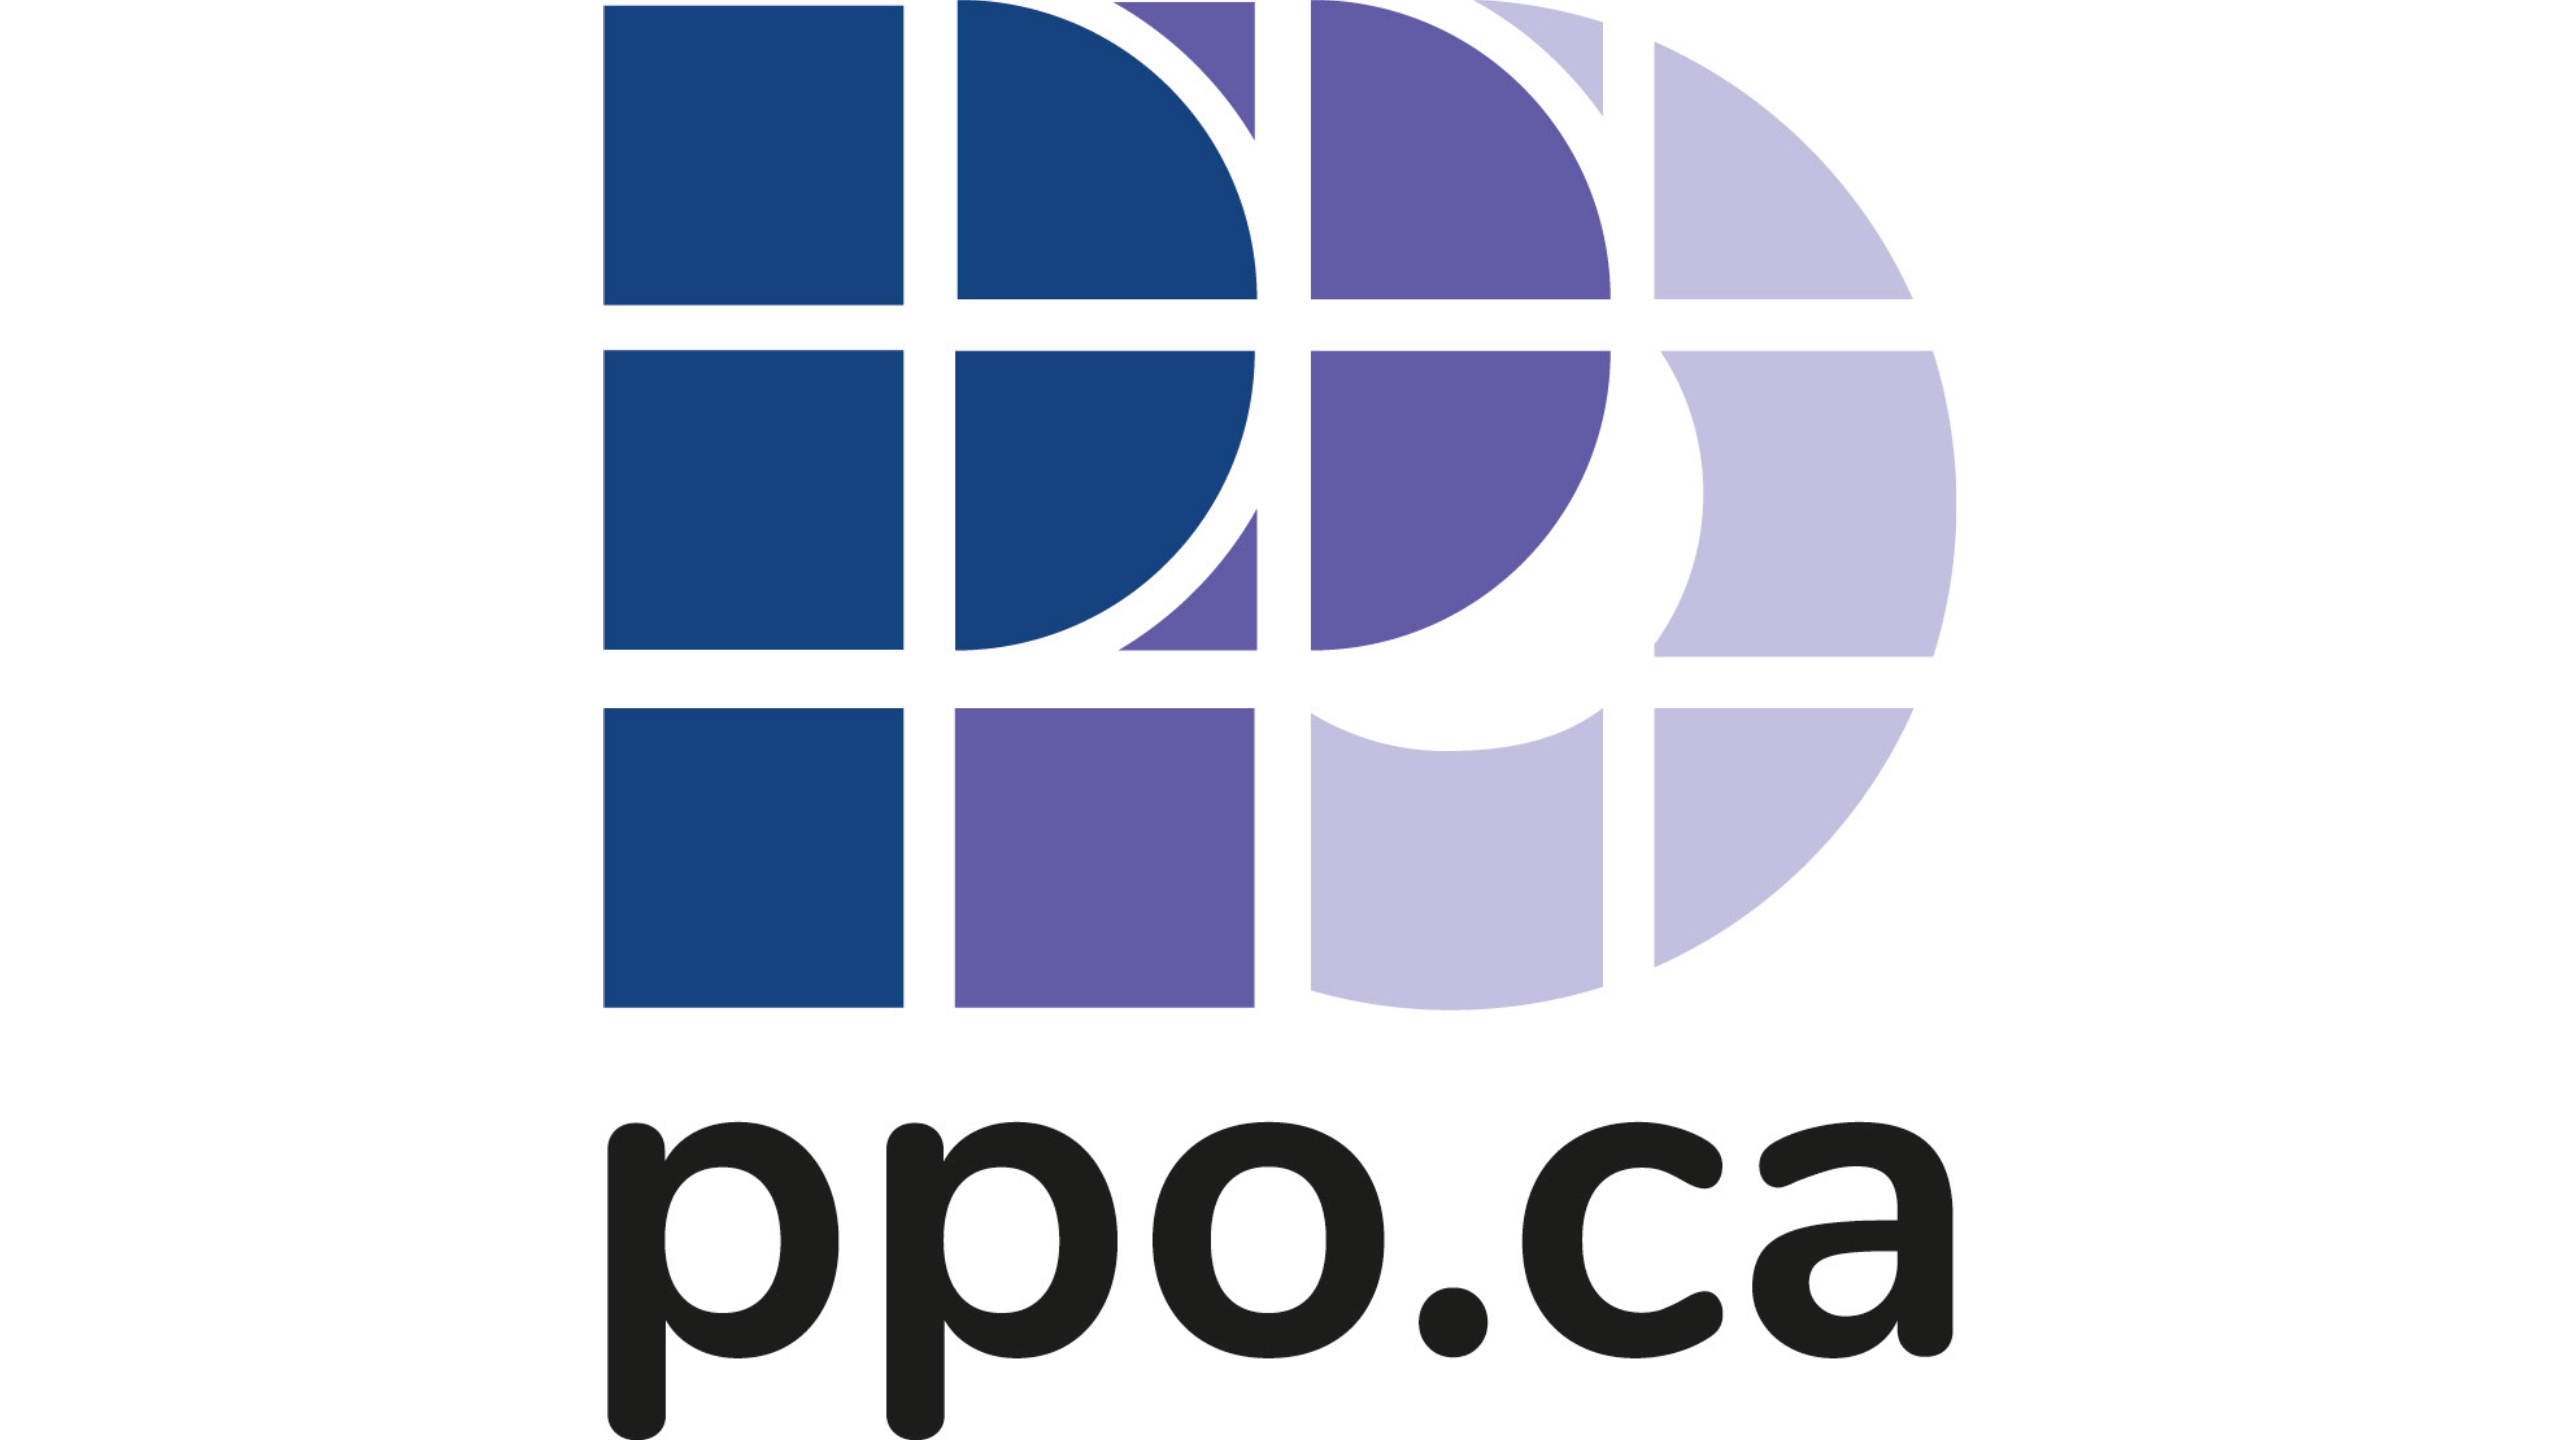 This is a photo of the P&P Optica logo.